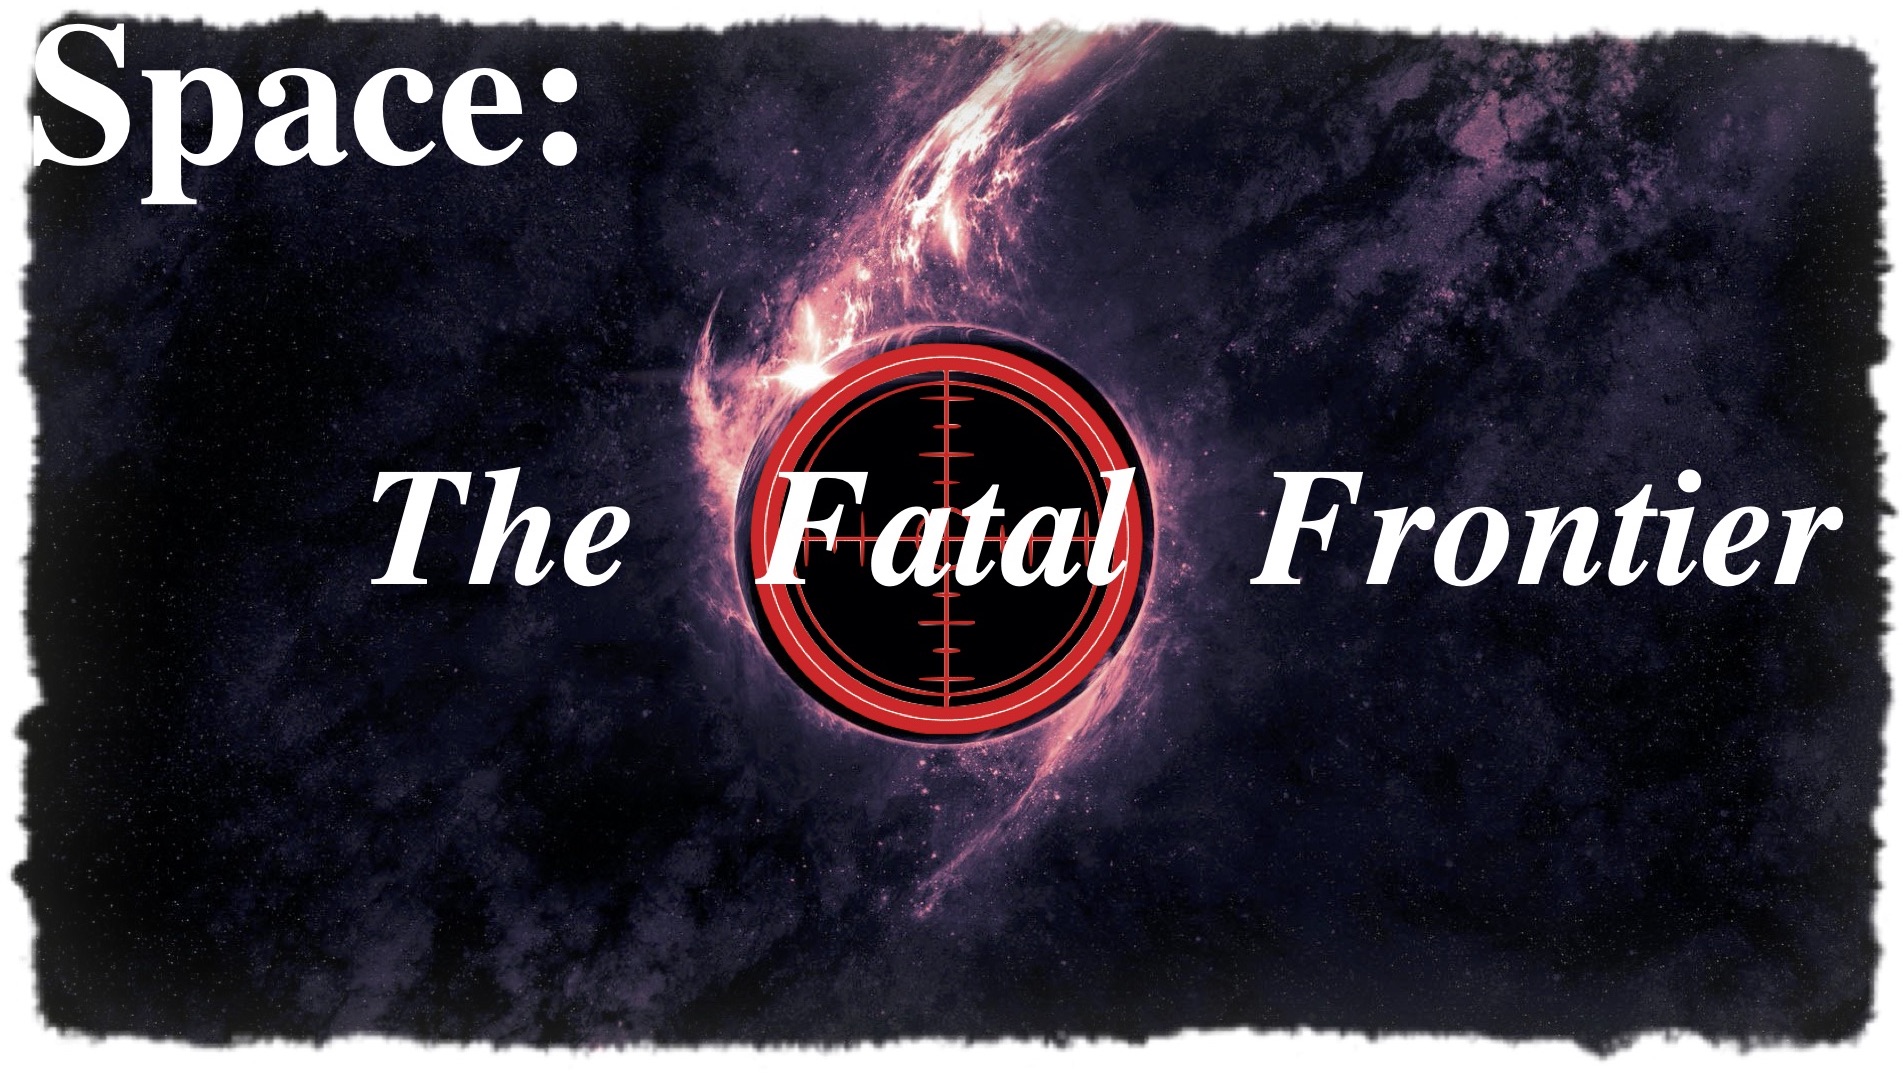 Space: The Fatal Frontier